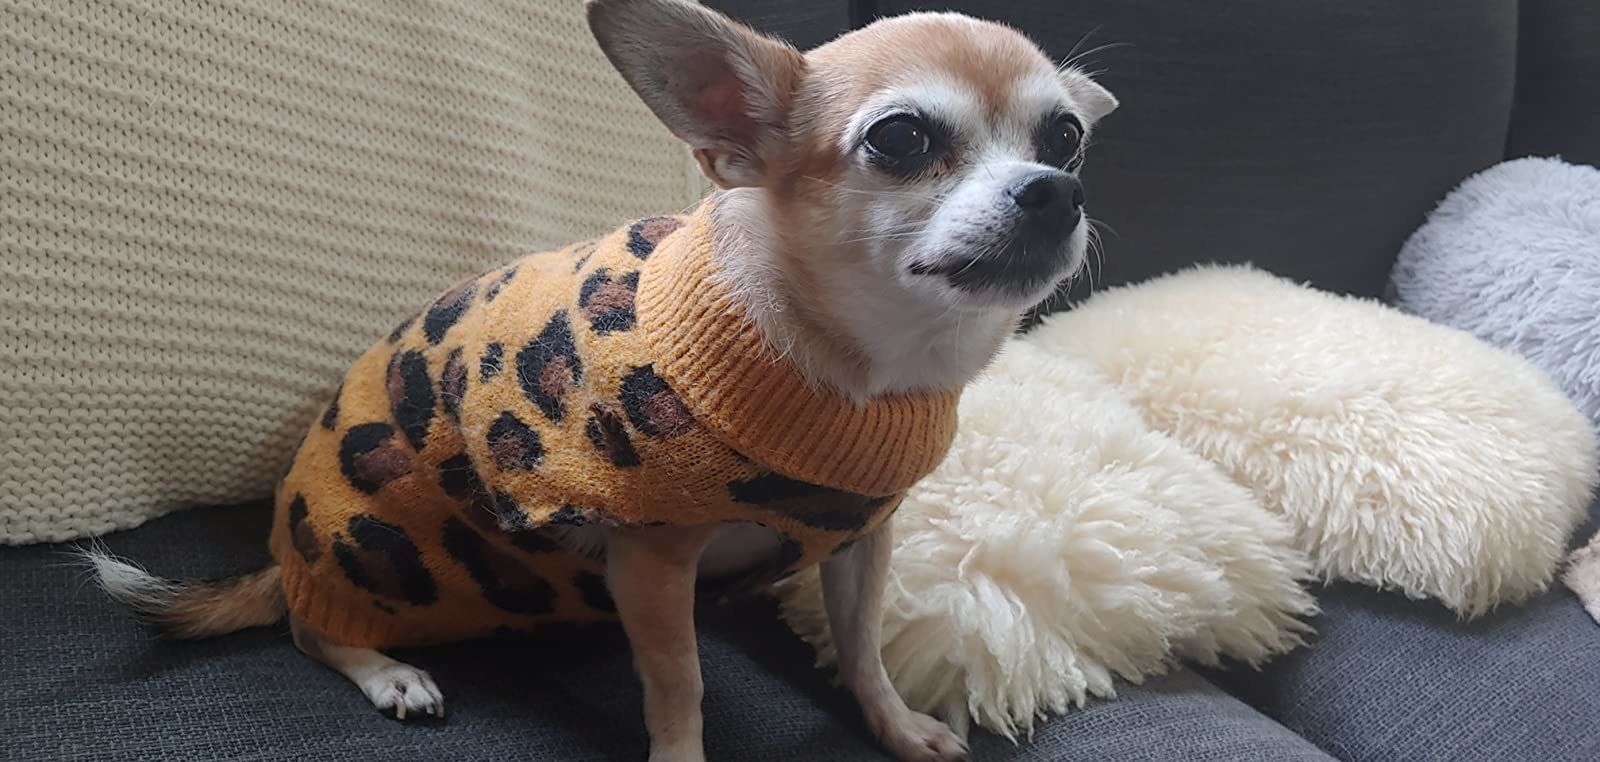 A chihuahua in the sweater in yellow